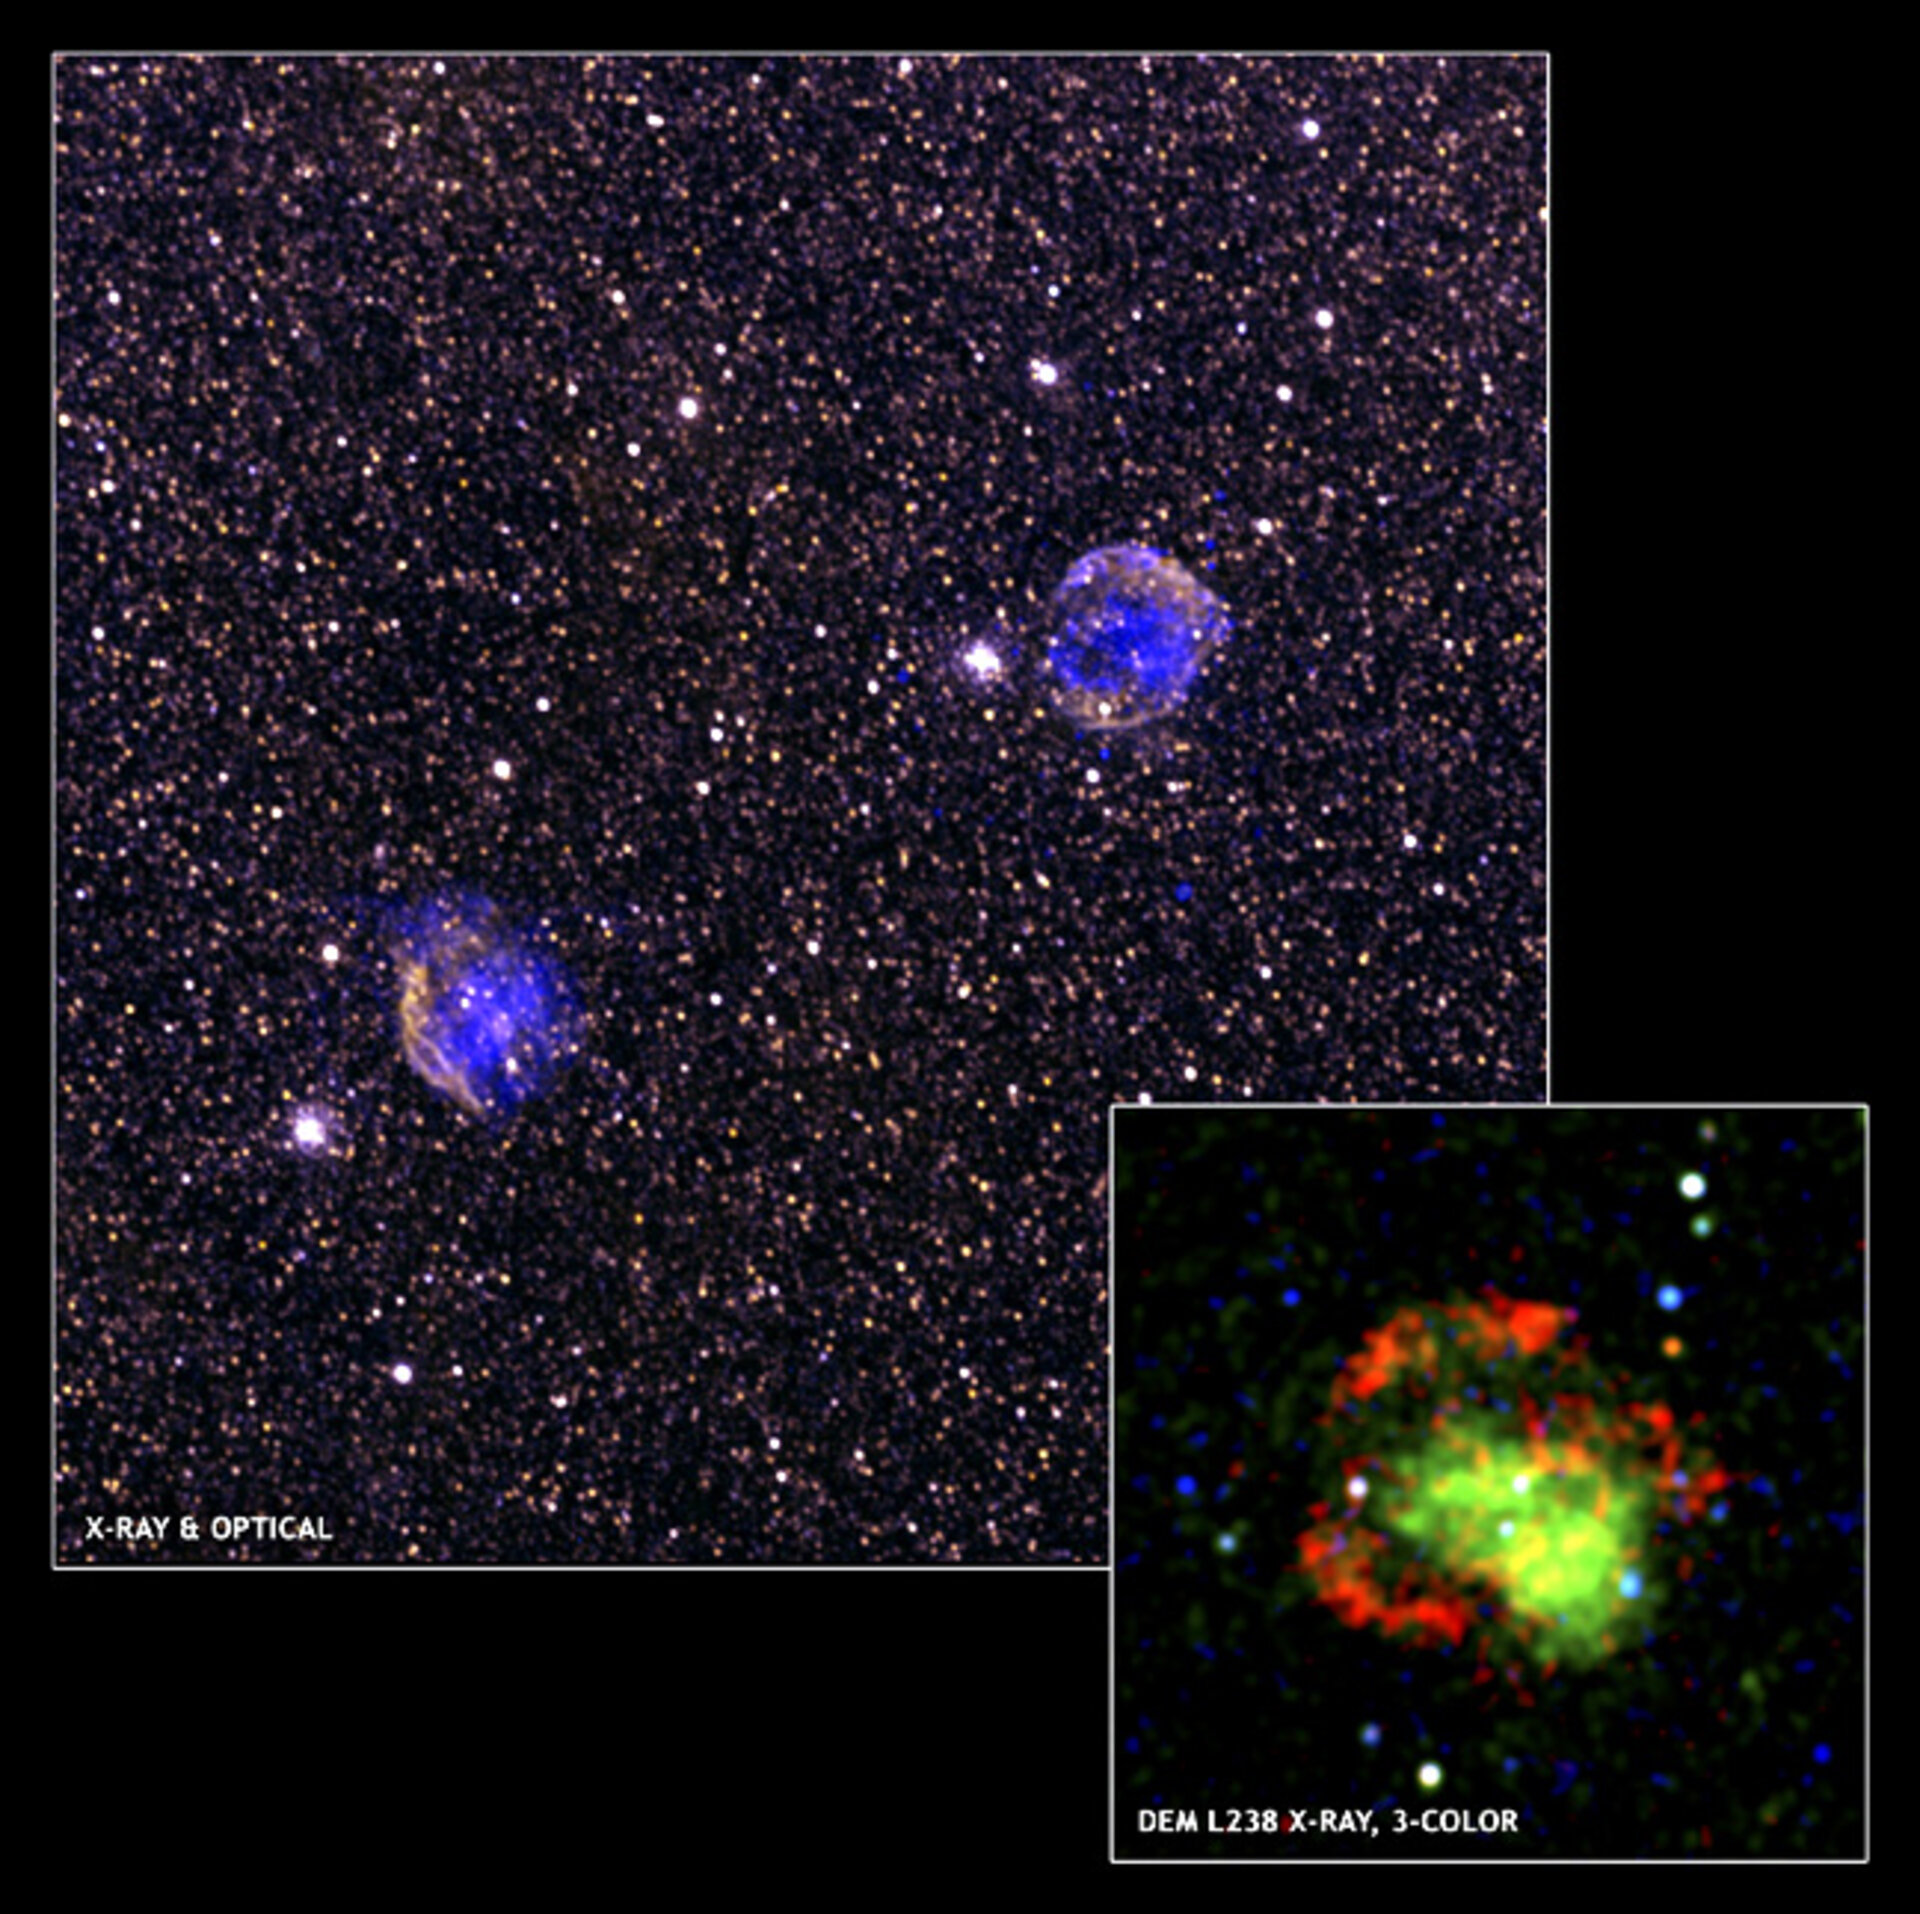 ESA - X-ray evidence supports possible new class of supernova